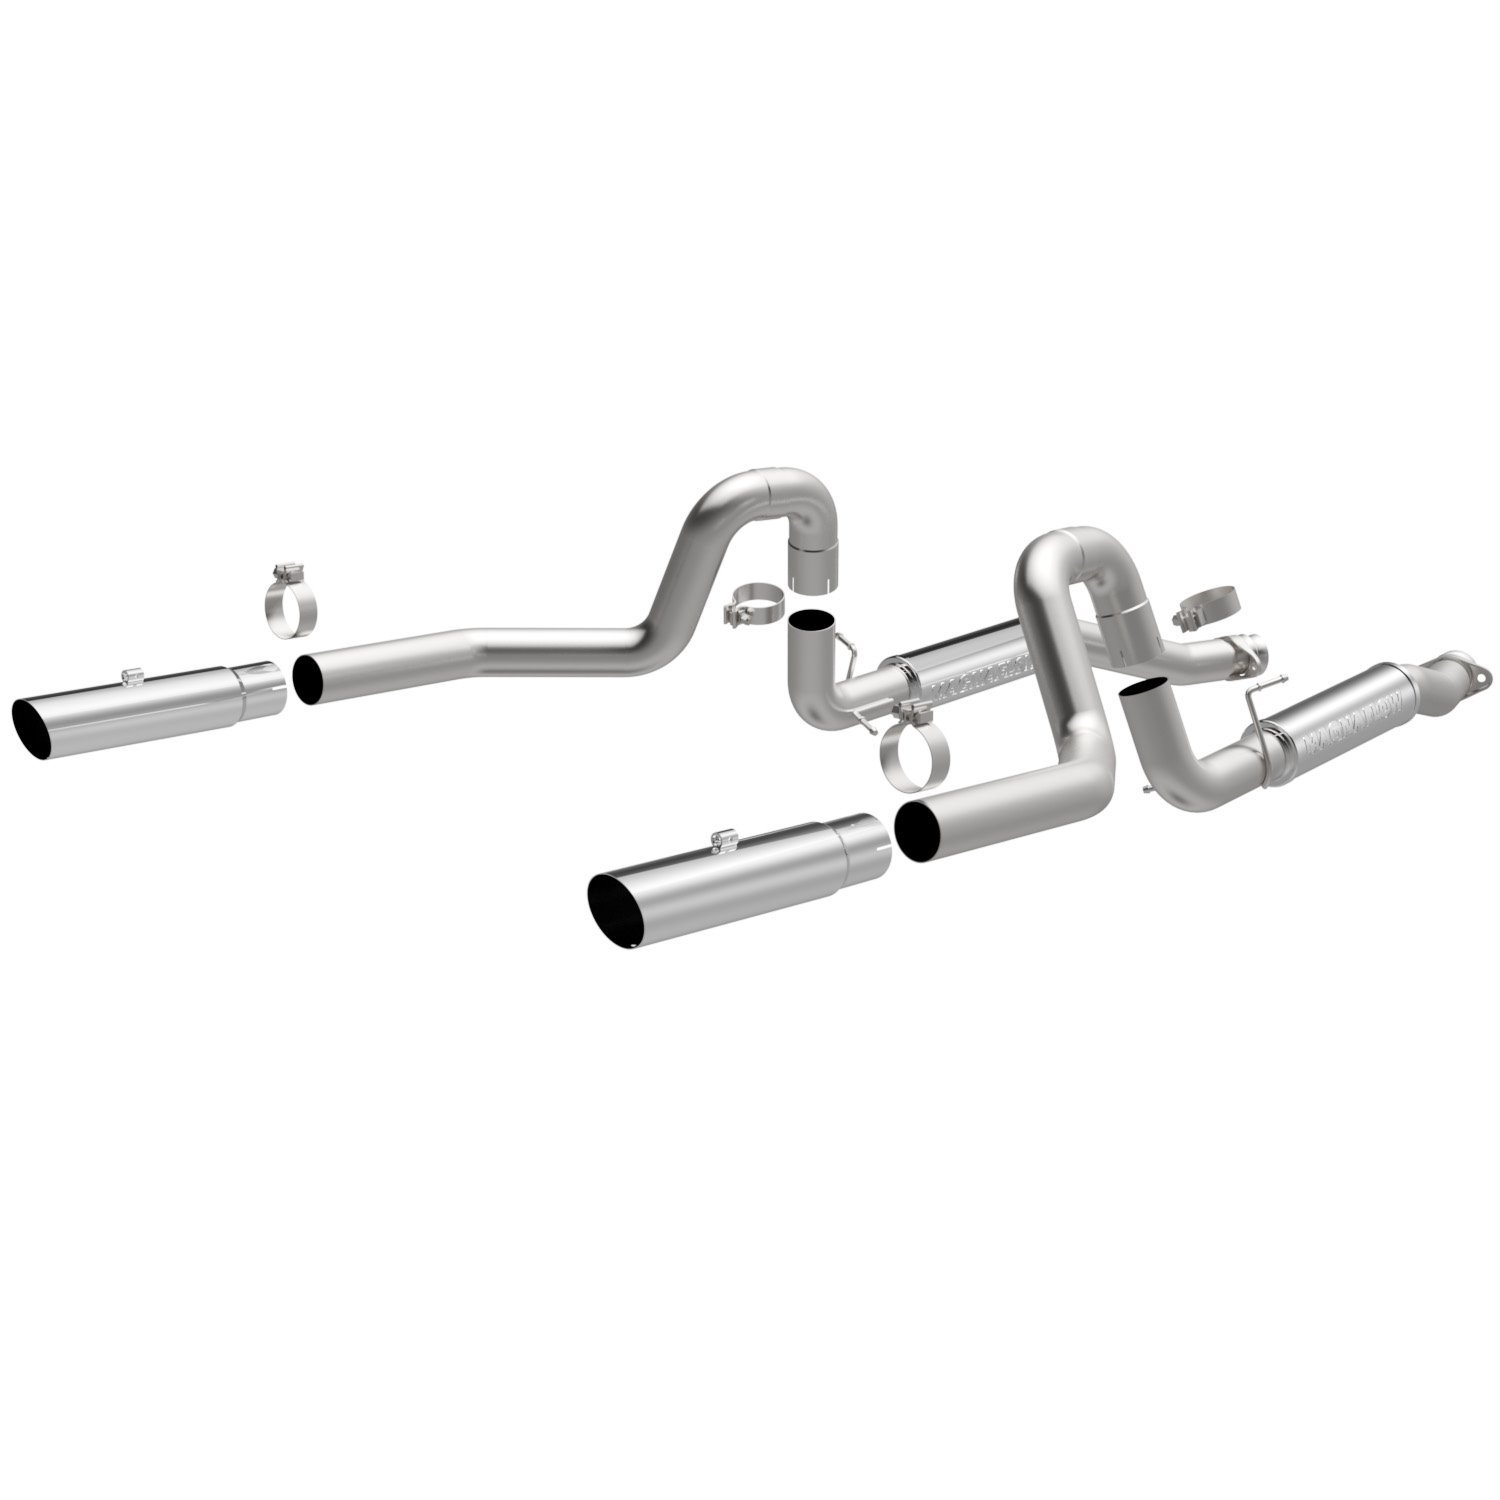 Competition Series Cat-Back Exhaust System 1999-2004 Mustang GT, Mach 1 4.6L V8